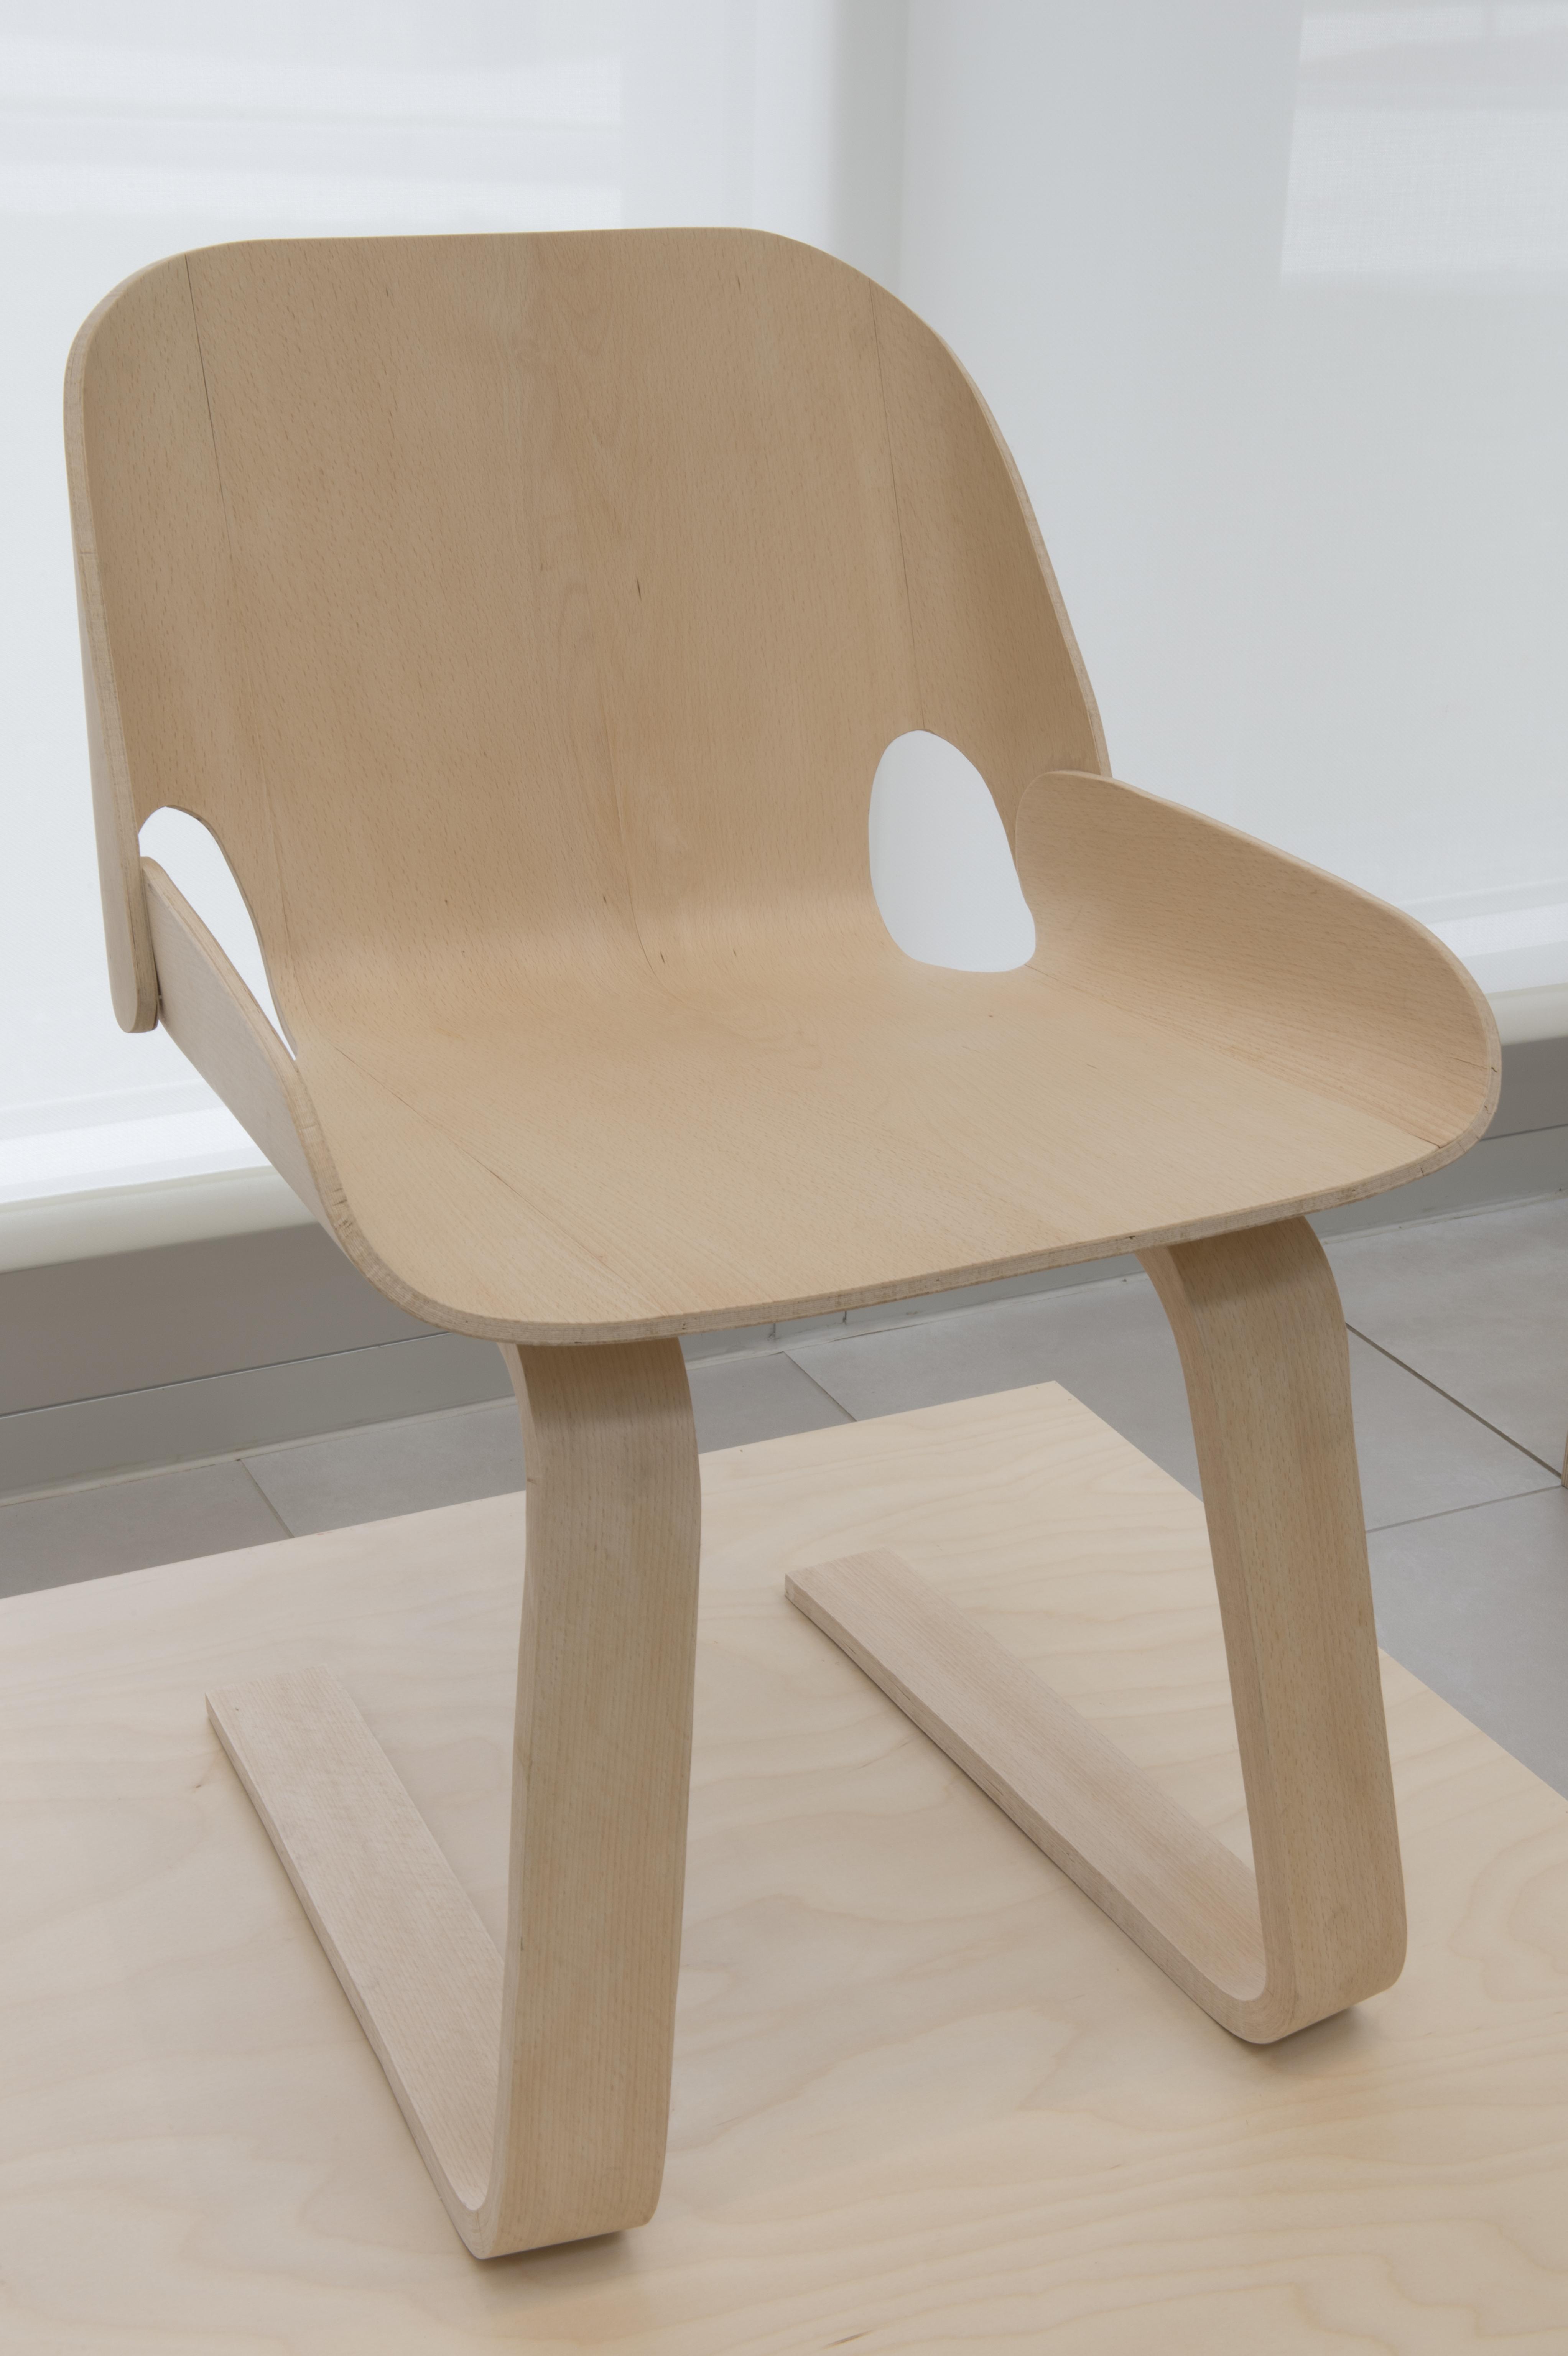 A chair on display in University Gallery.